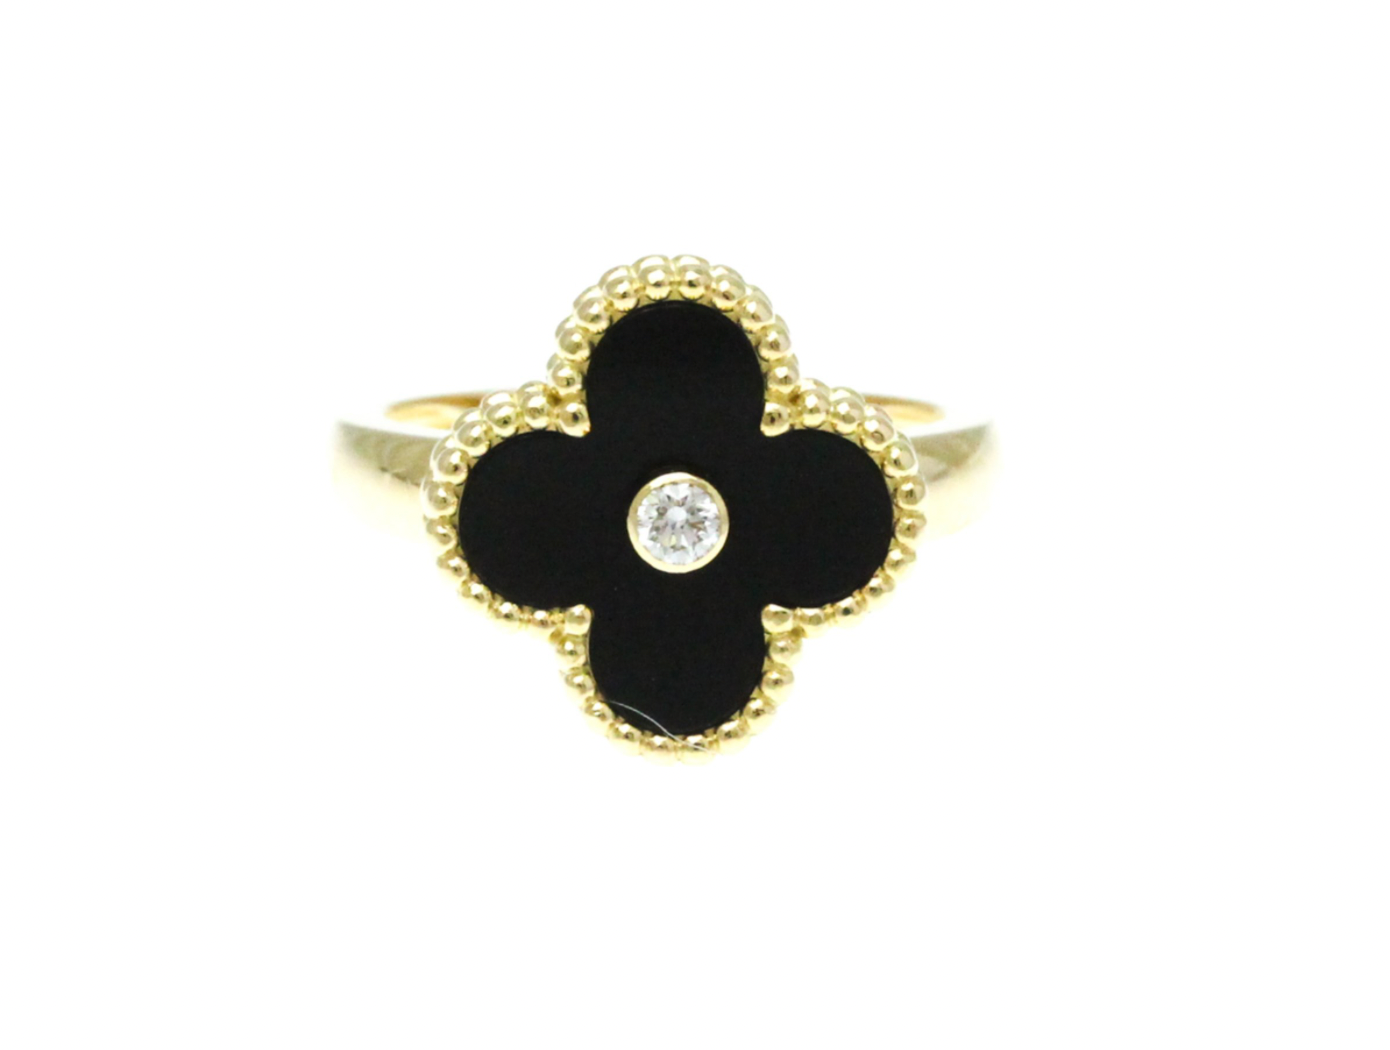 Pre-owned Van Cleef & Arpels 18K yellow gold Vintage Alhambra ring with  onyx inlay & diamond